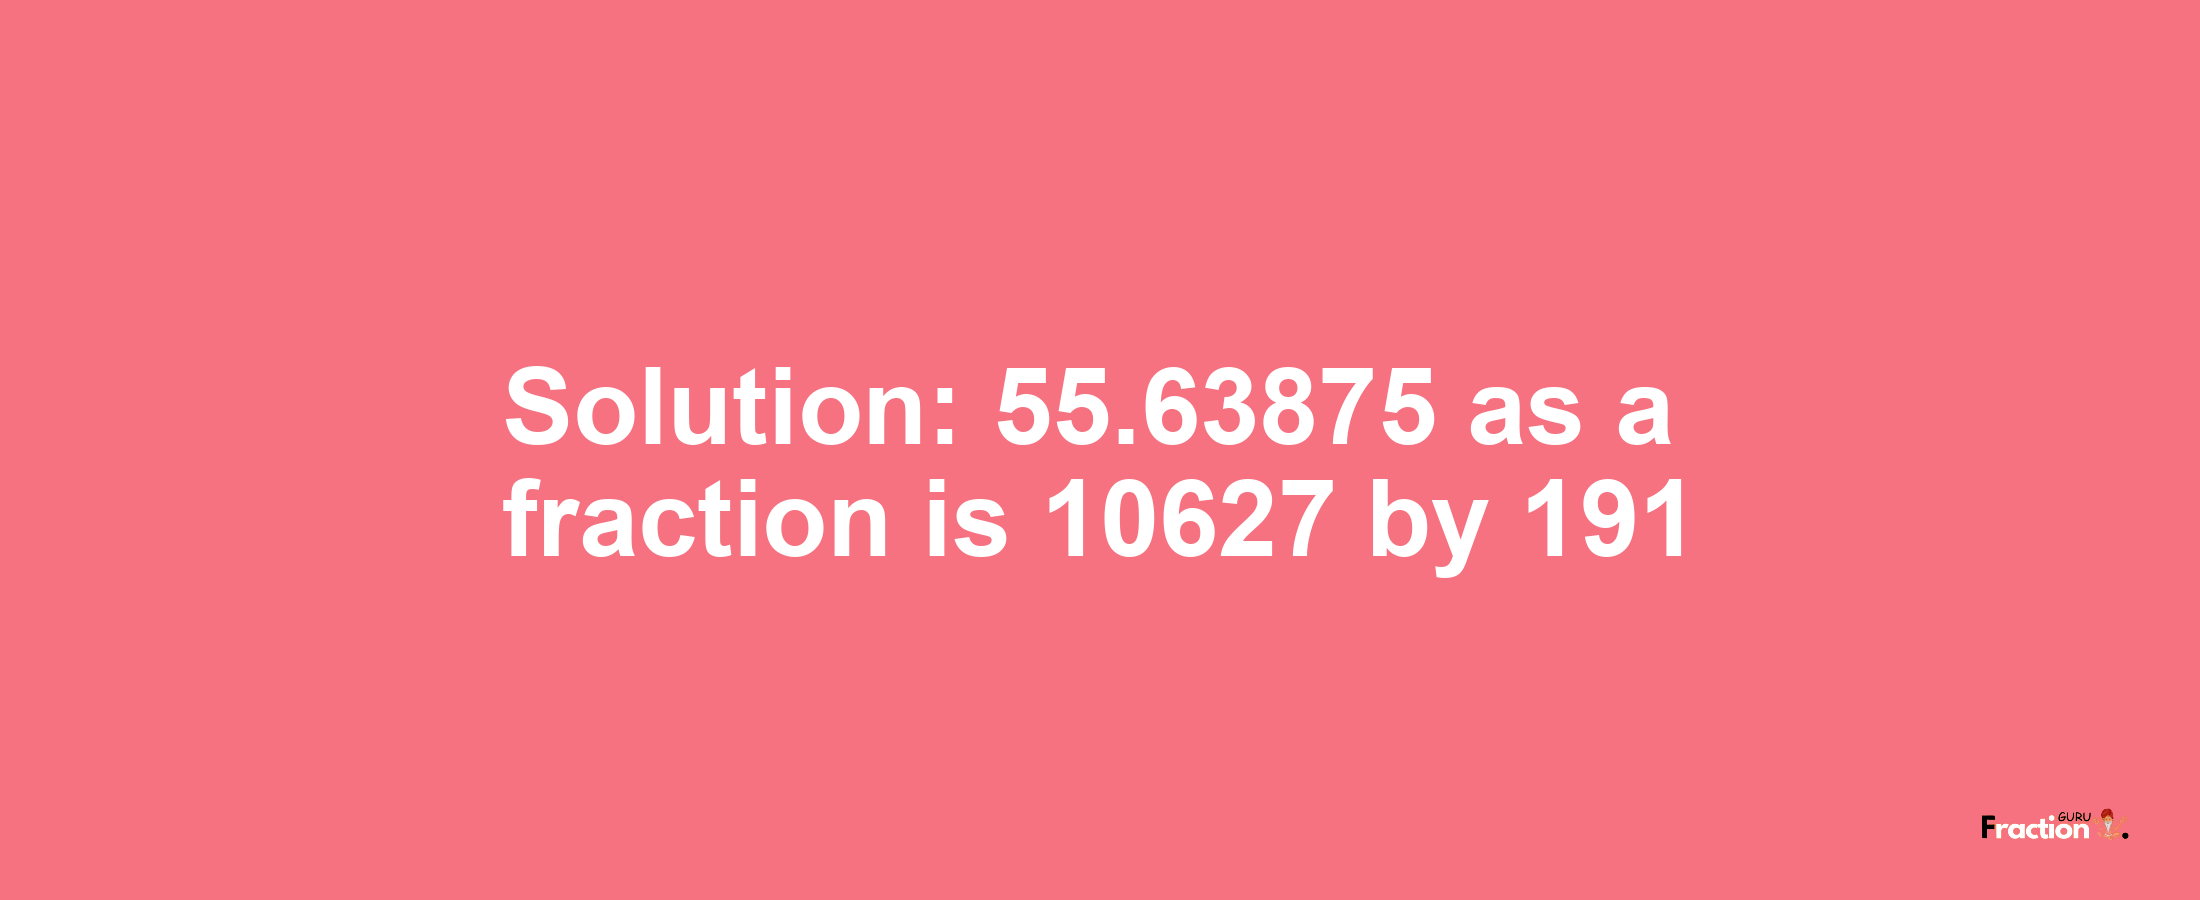 Solution:55.63875 as a fraction is 10627/191